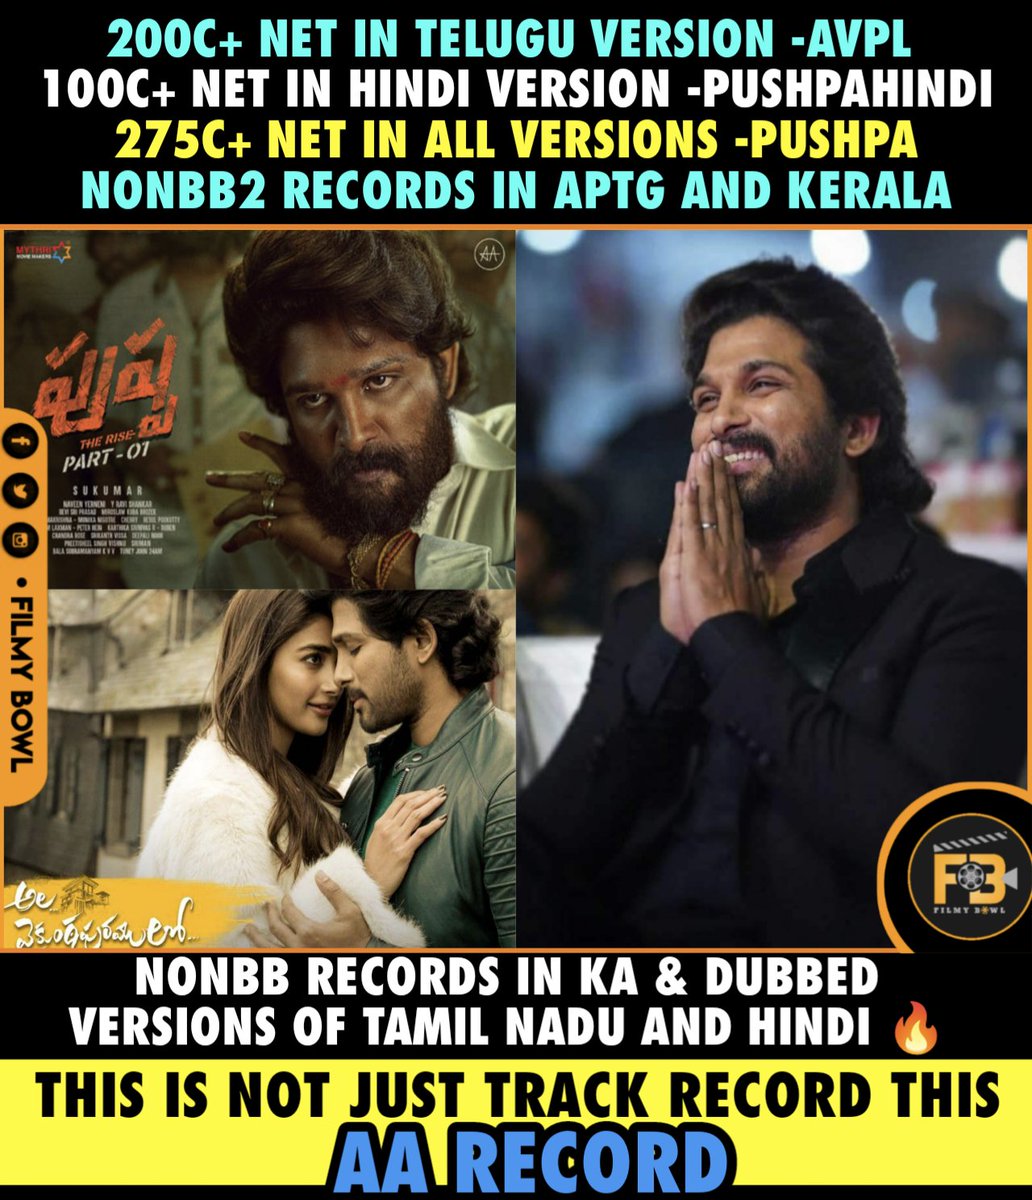 This is not just Track Record this #AArecord

#AlluArjun #NationalAward #Pushpa #Pushpa2TheRule